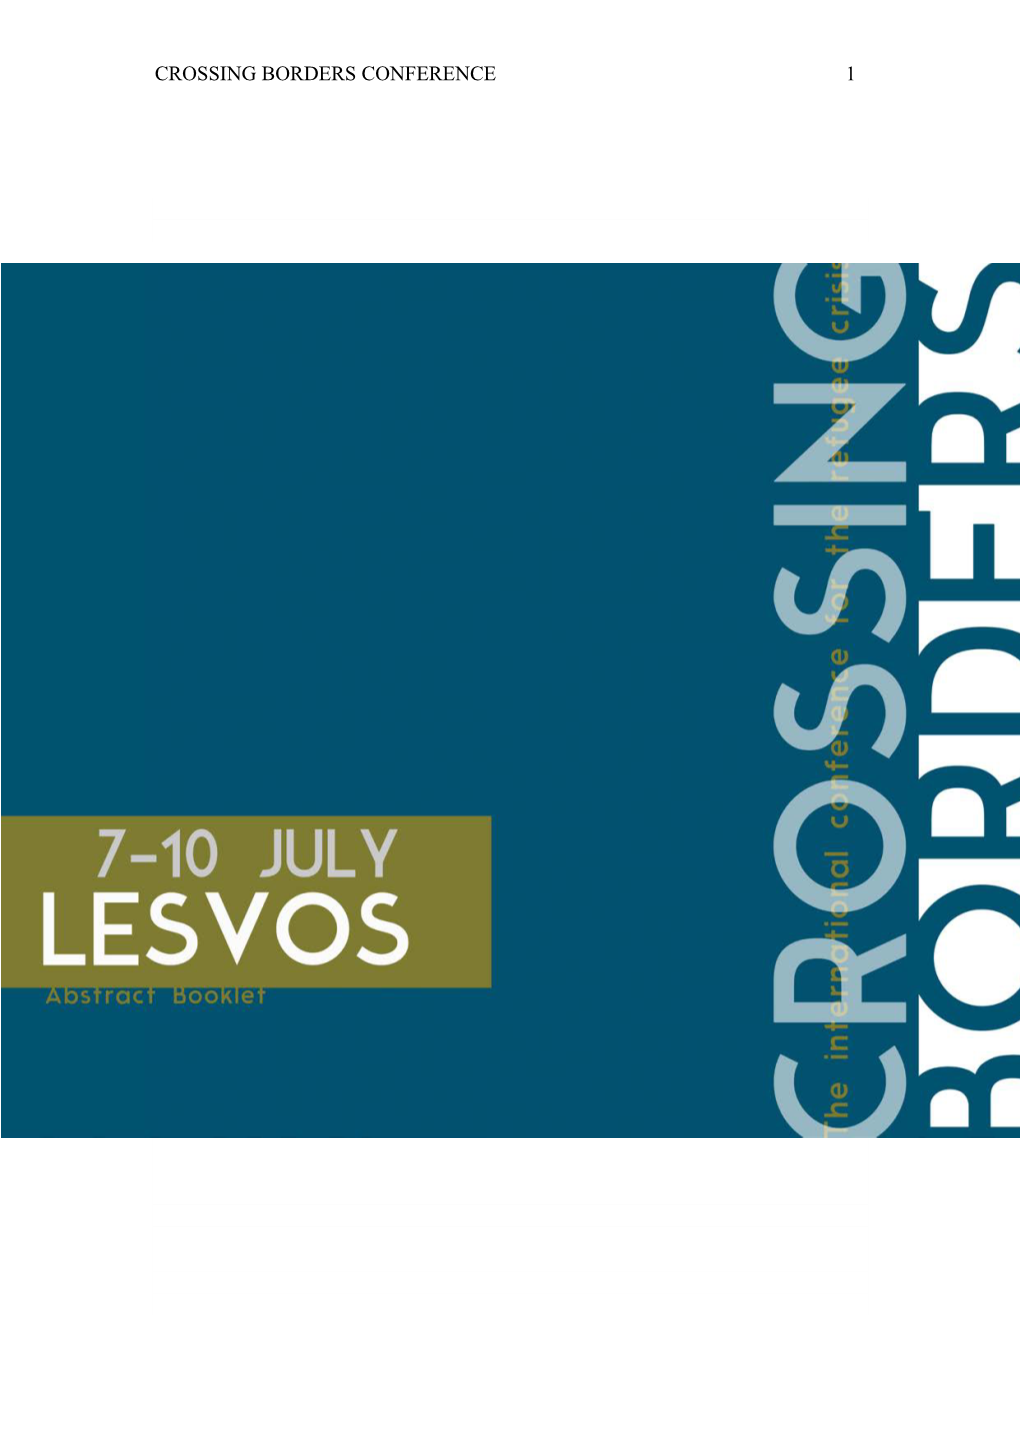 Crossing Borders Conference 1